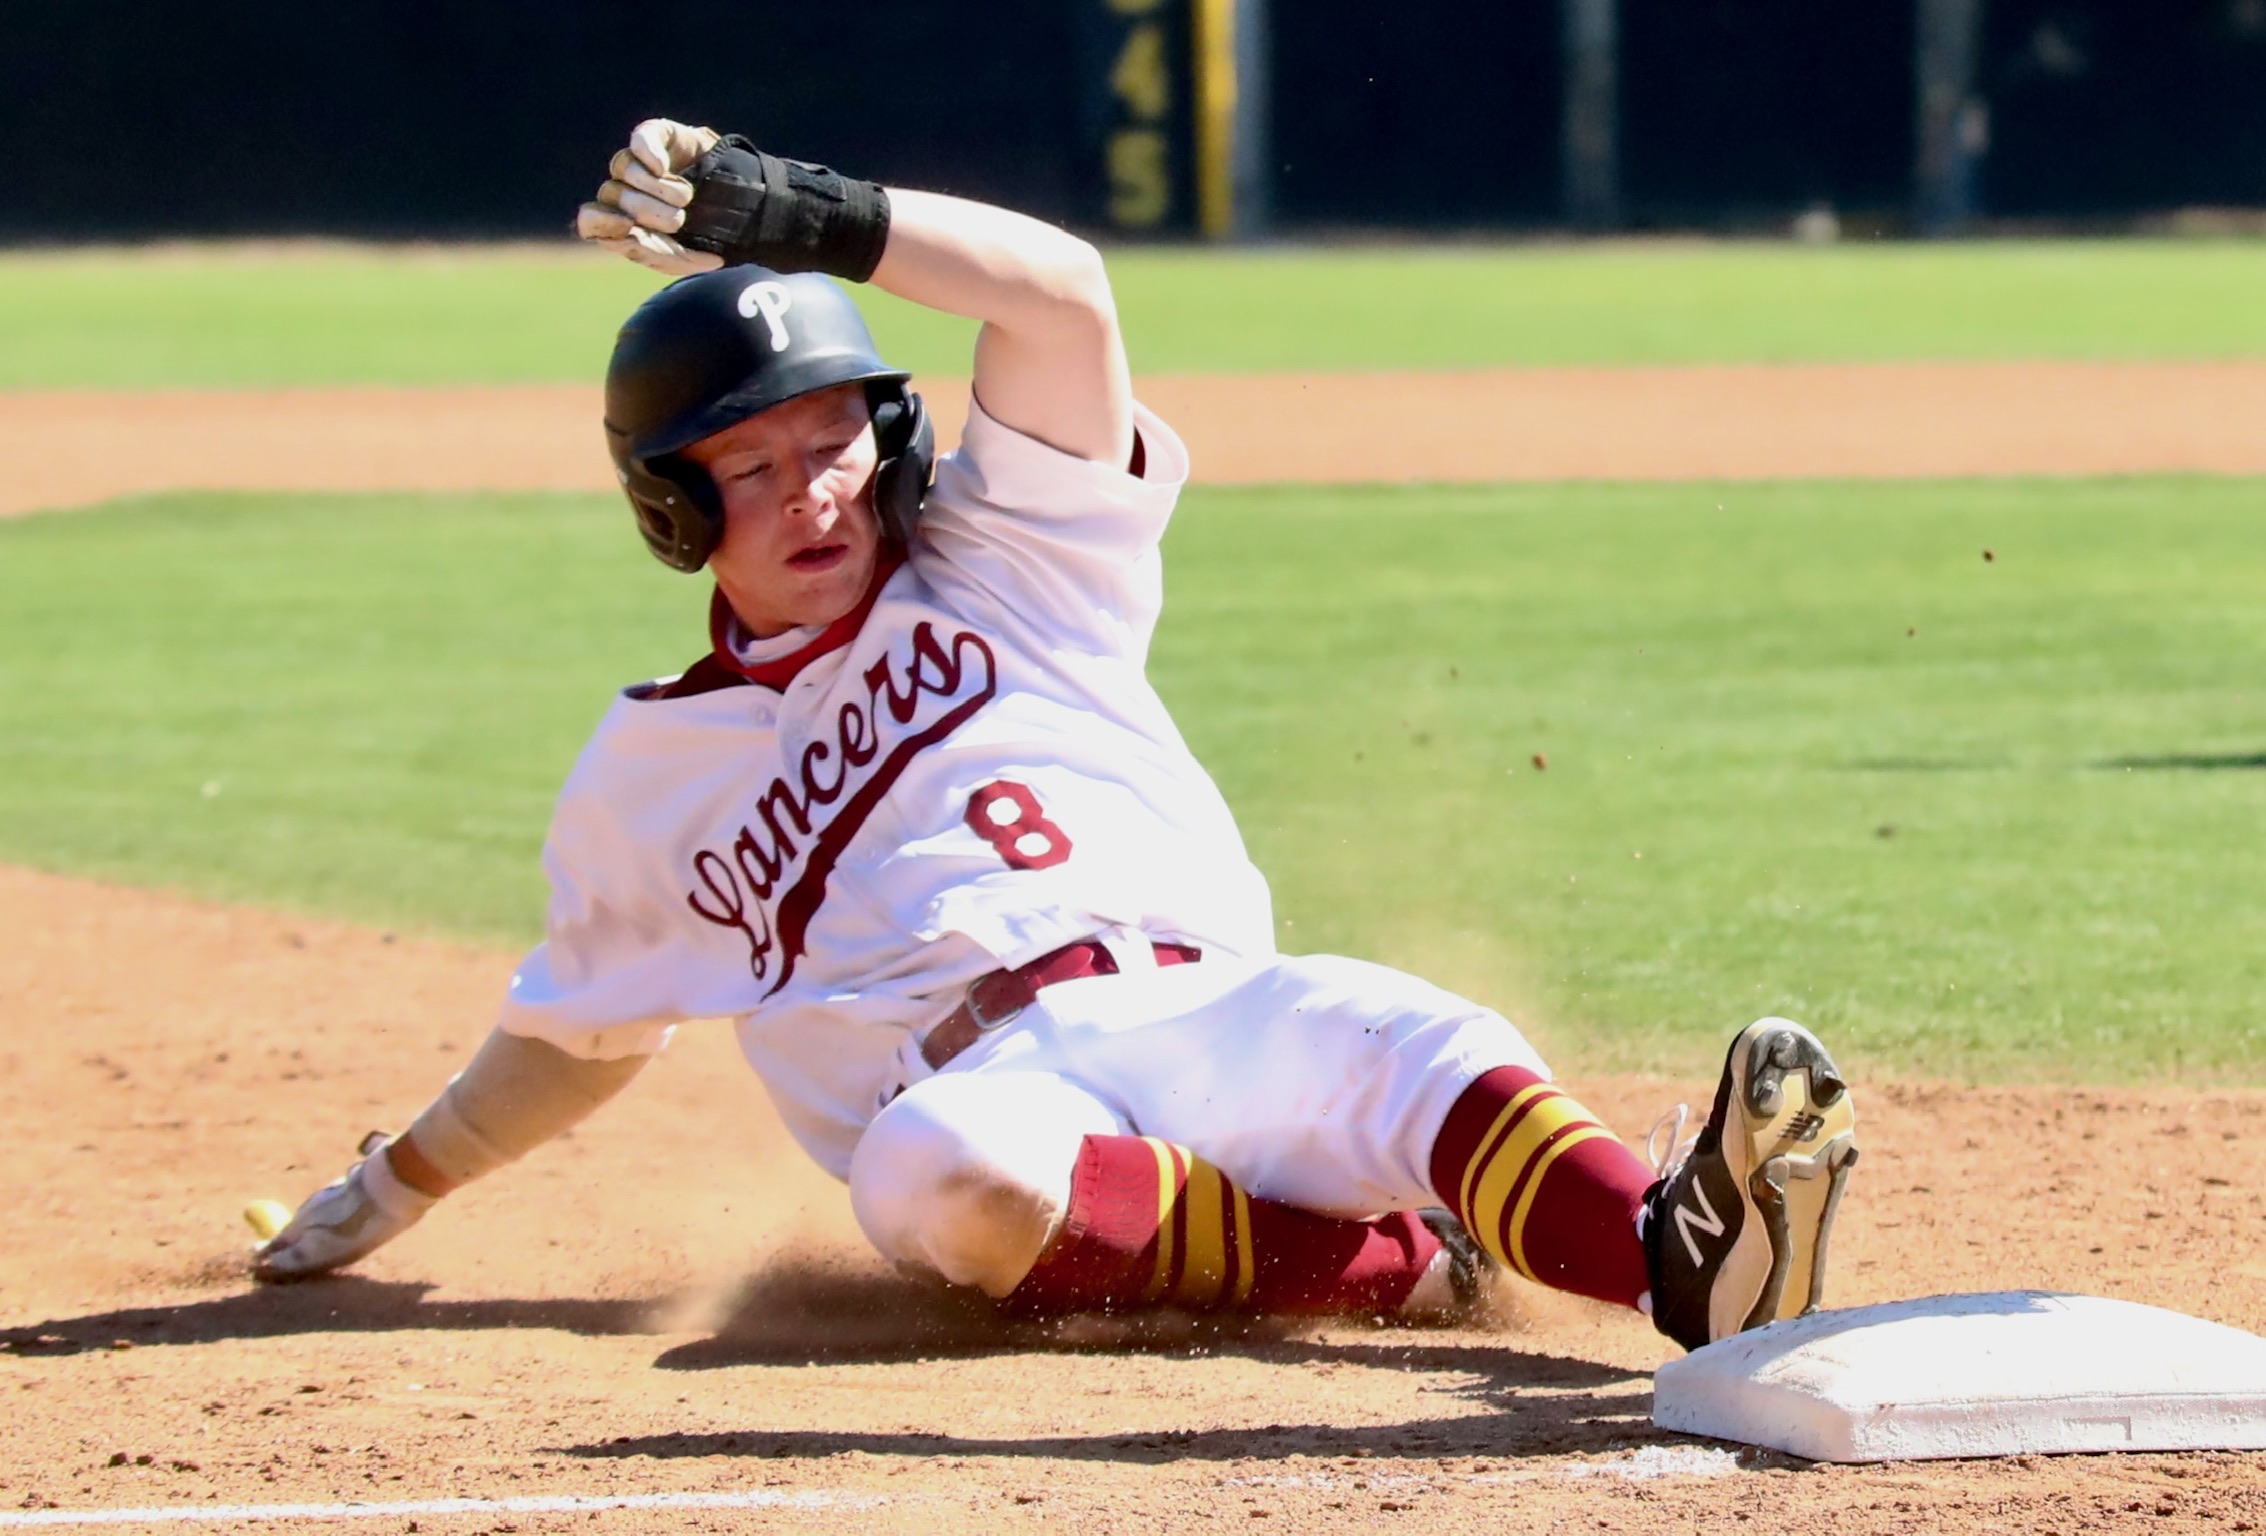 Max Blessinger slides into third base during PCC's win over Victor Valley on Thursday (photo by Michael Watkins, PCC Athletics).